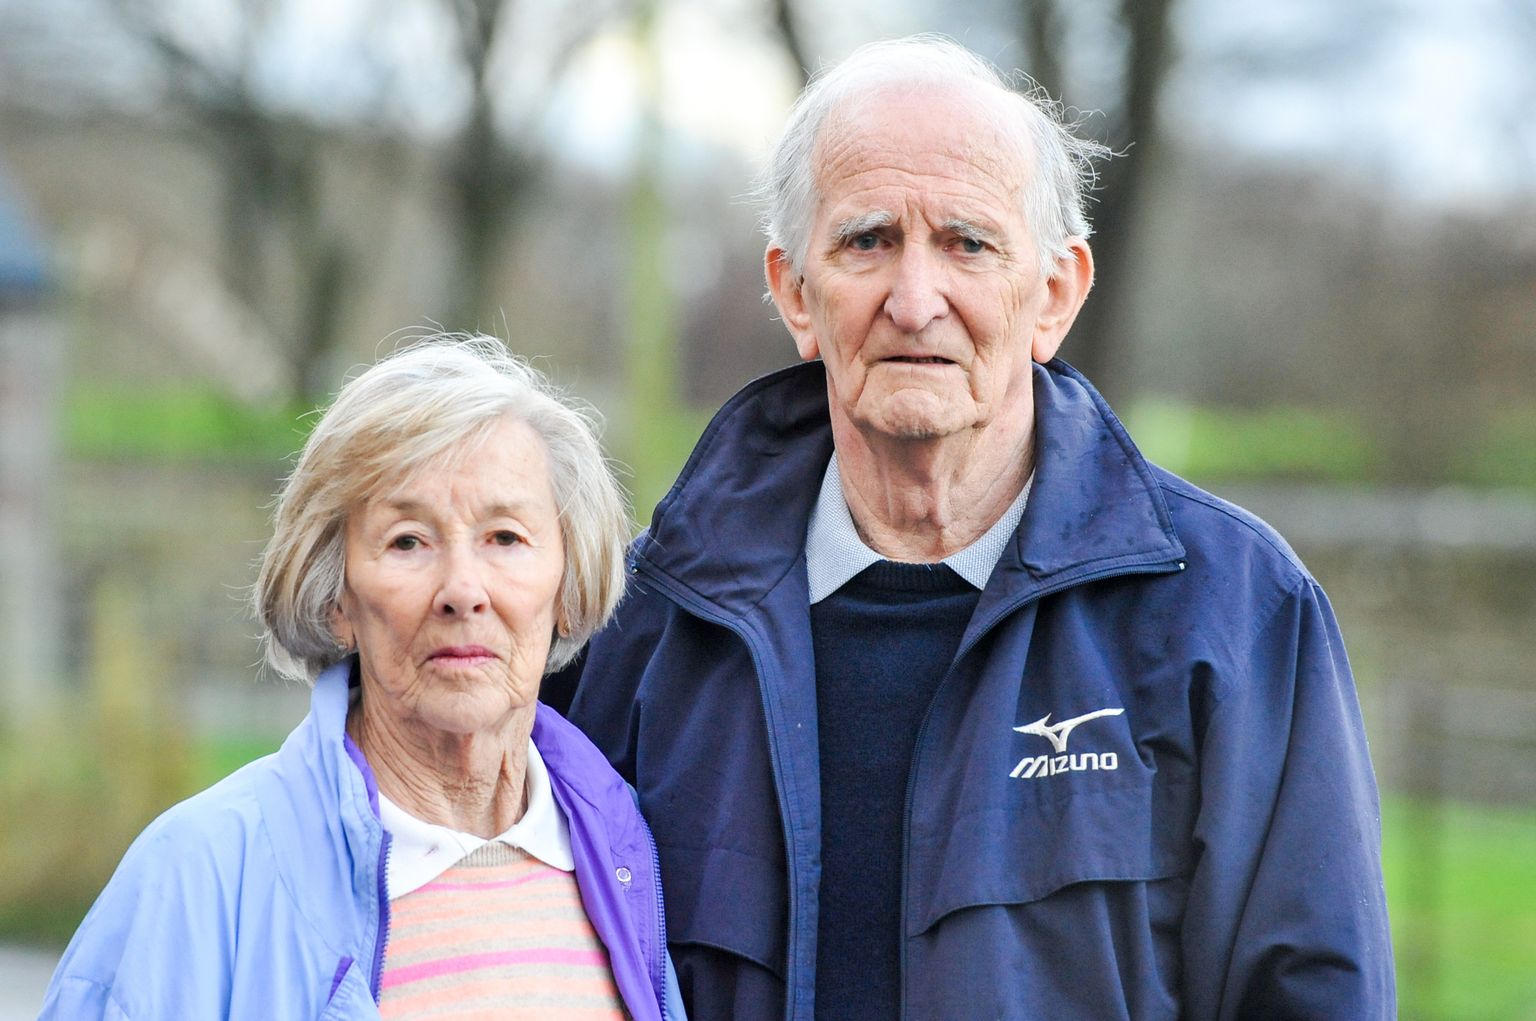 PIC FROM MERCURY PRESS. PIC DATE 23.11.17. LANCASHIRE.(PICTURED: ARTHUR EVANS, 86, AND HIS PARTNER EVA EVANS, 84.)An elderly couple claim they are living a nightmare after their neighbour installed a 6ft fence directly in front of their living room window blocking their view and leaving them sitting in darkness. Arthur and Eva Evans, who are in their eighties, moved into their ideal home in Ashton with Stoddy, near Lancaster, 15 years ago to enjoy the peace and tranquillity of the countryside after they retired. But the great-grandparents feel they are being driven into an early grave after a number of run-ins with their neighbours.(SEE MERCURY COPY)